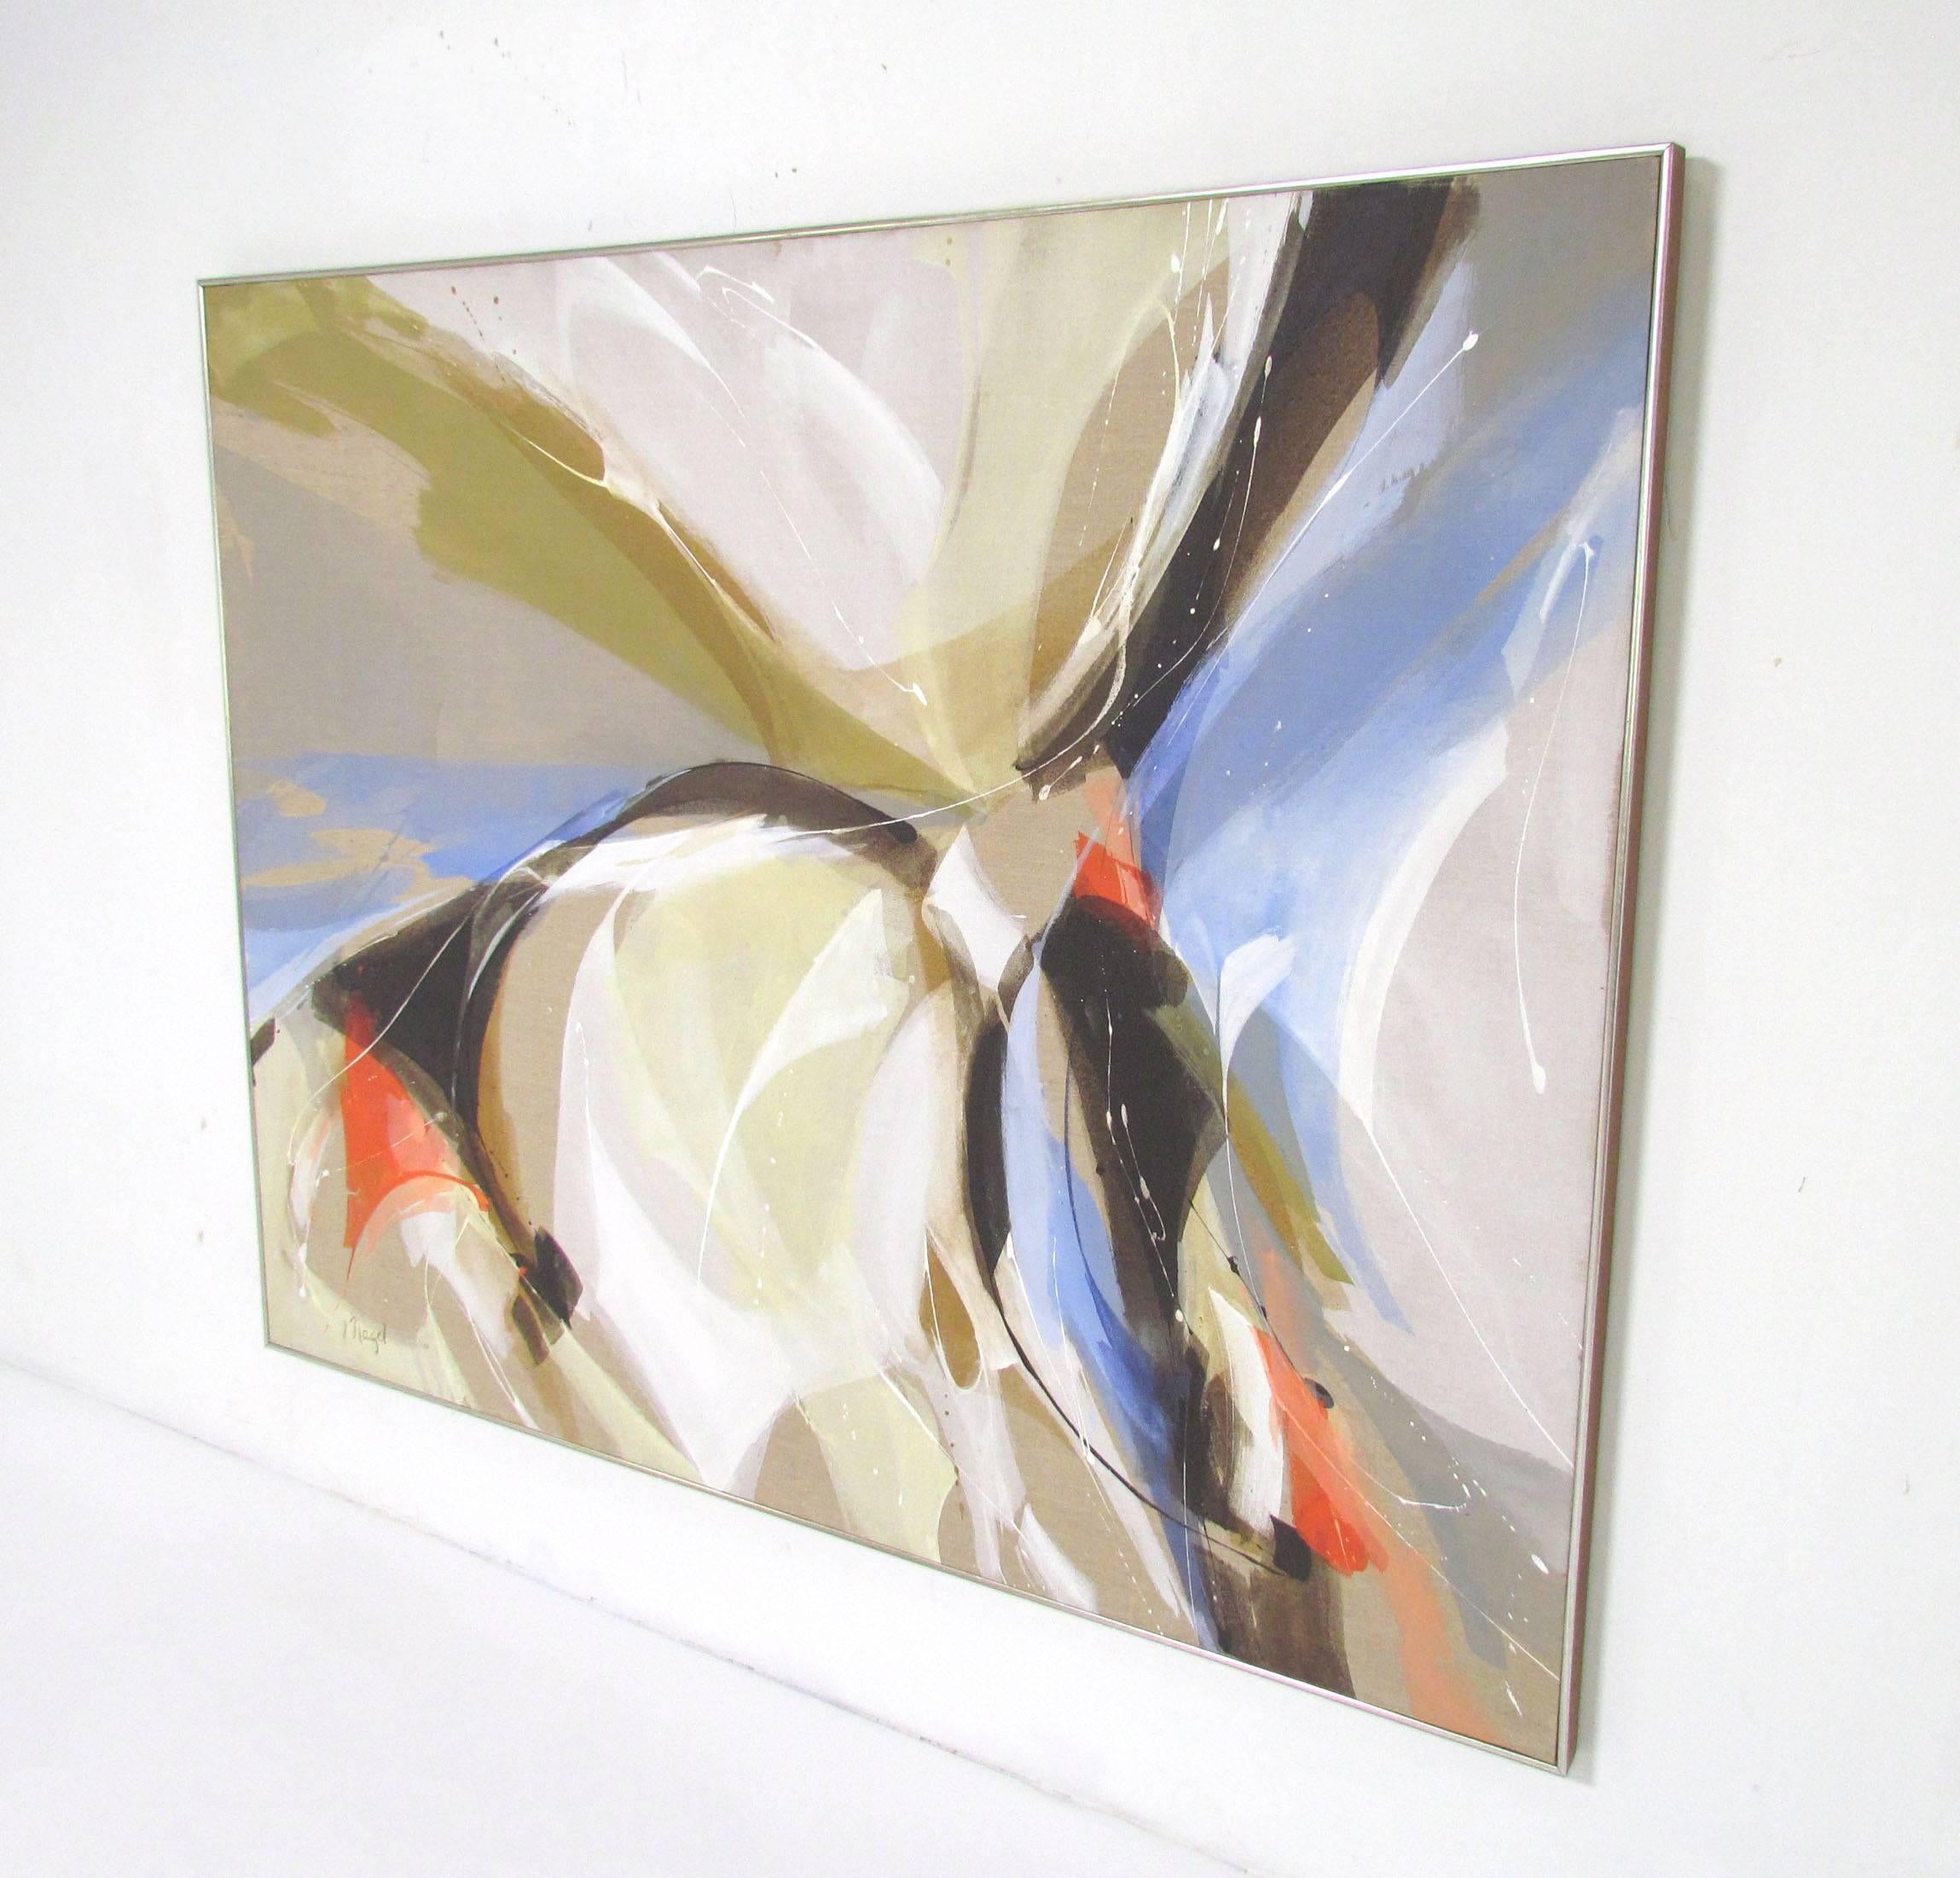 Late 20th Century Large Abstract Painting Signed J. Nagel, circa 1970s